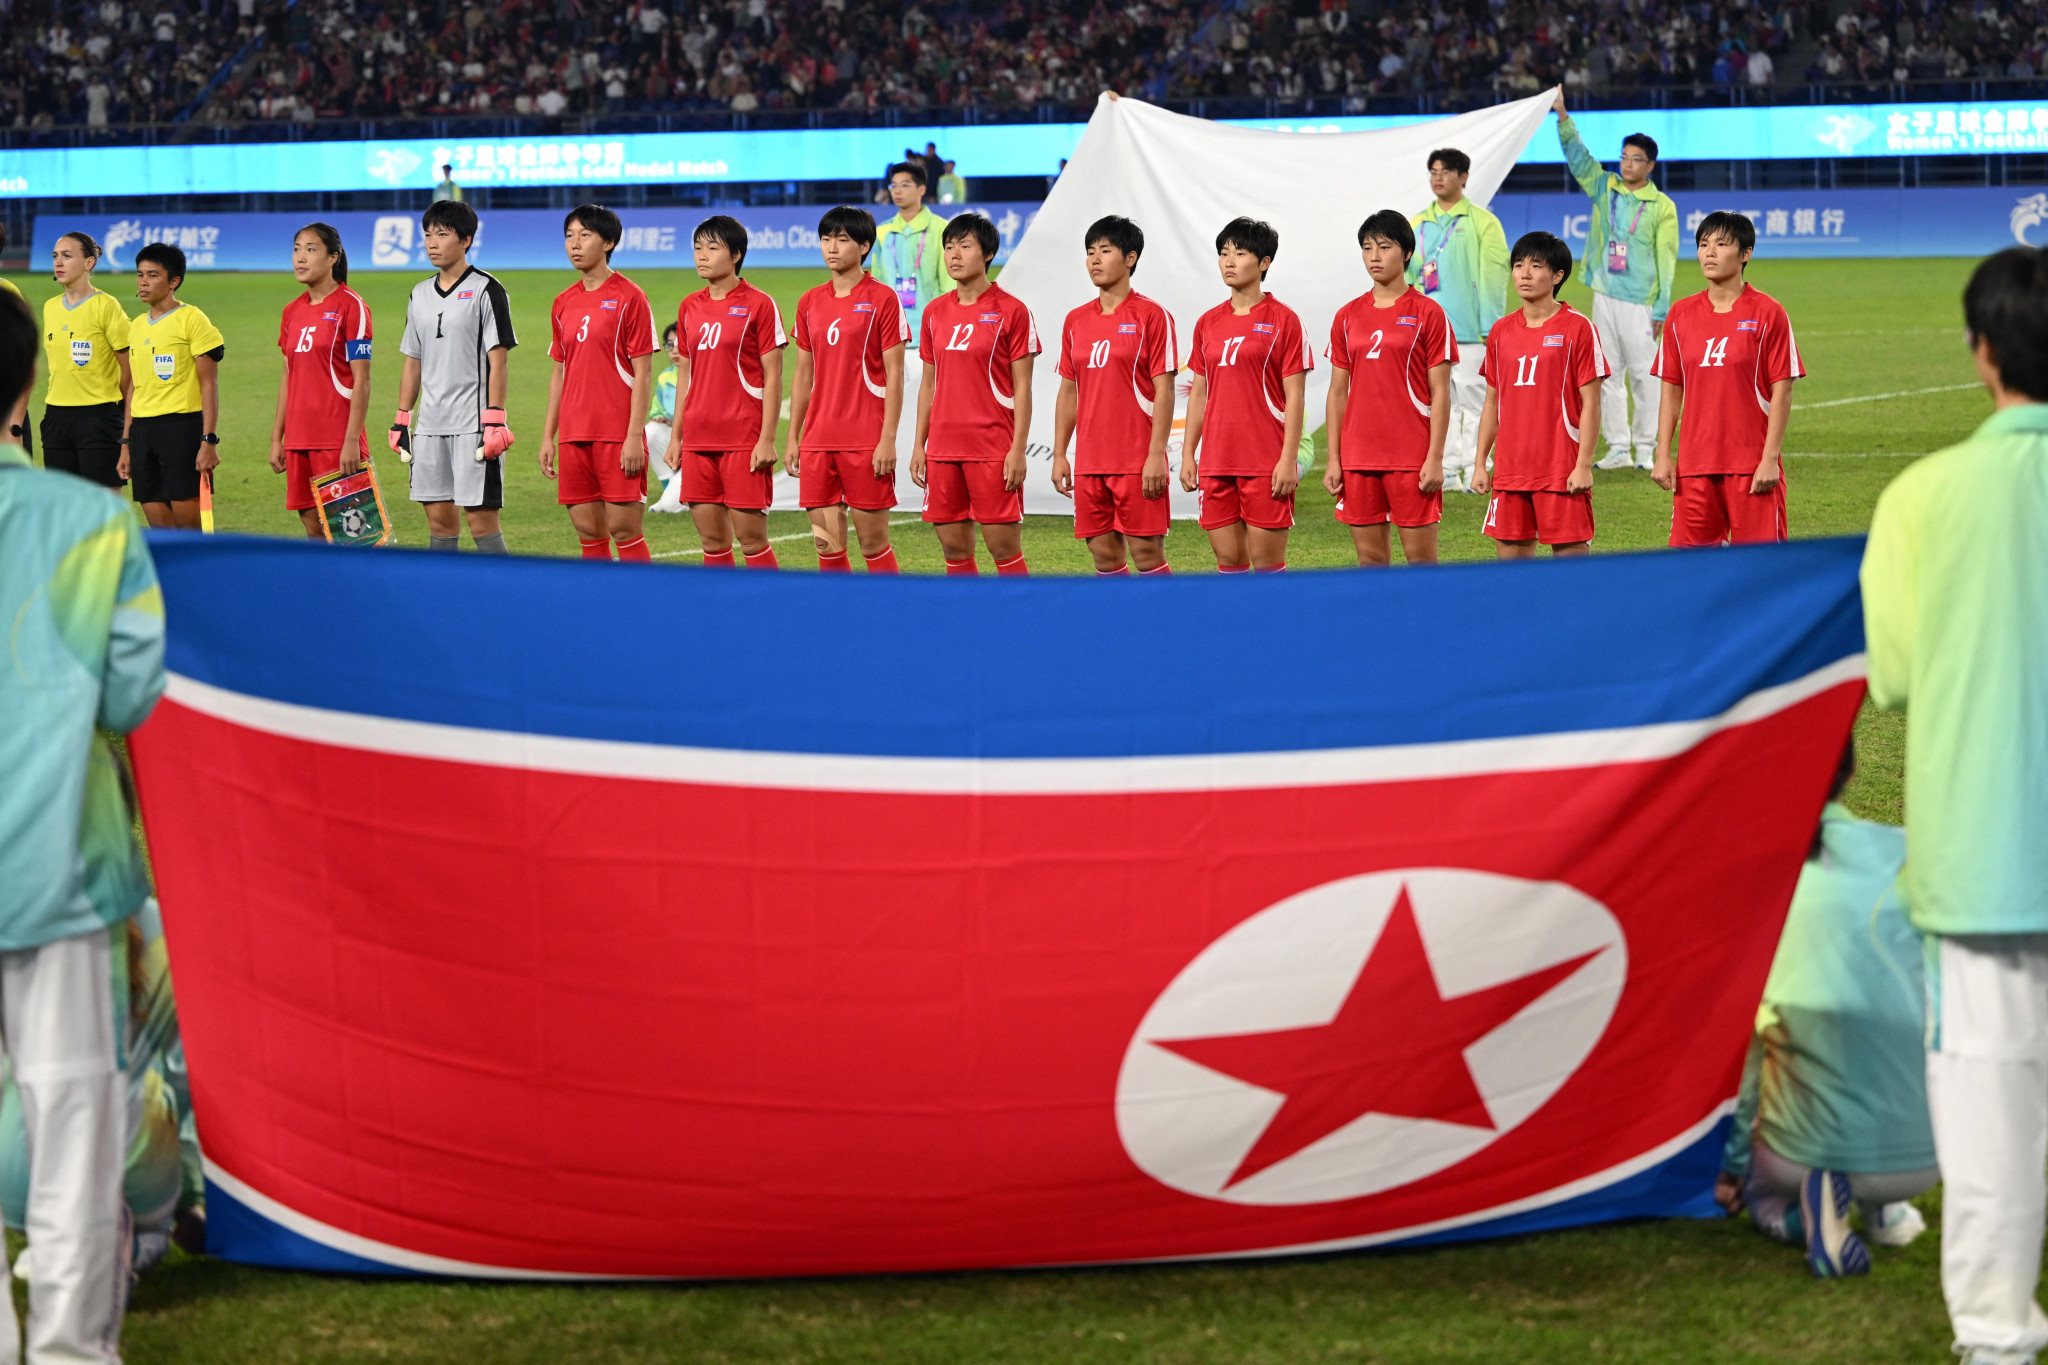 North Korea's flag has controversially been on display in Hangzhou 2022 despite going against WADA sanctions ©Getty Images